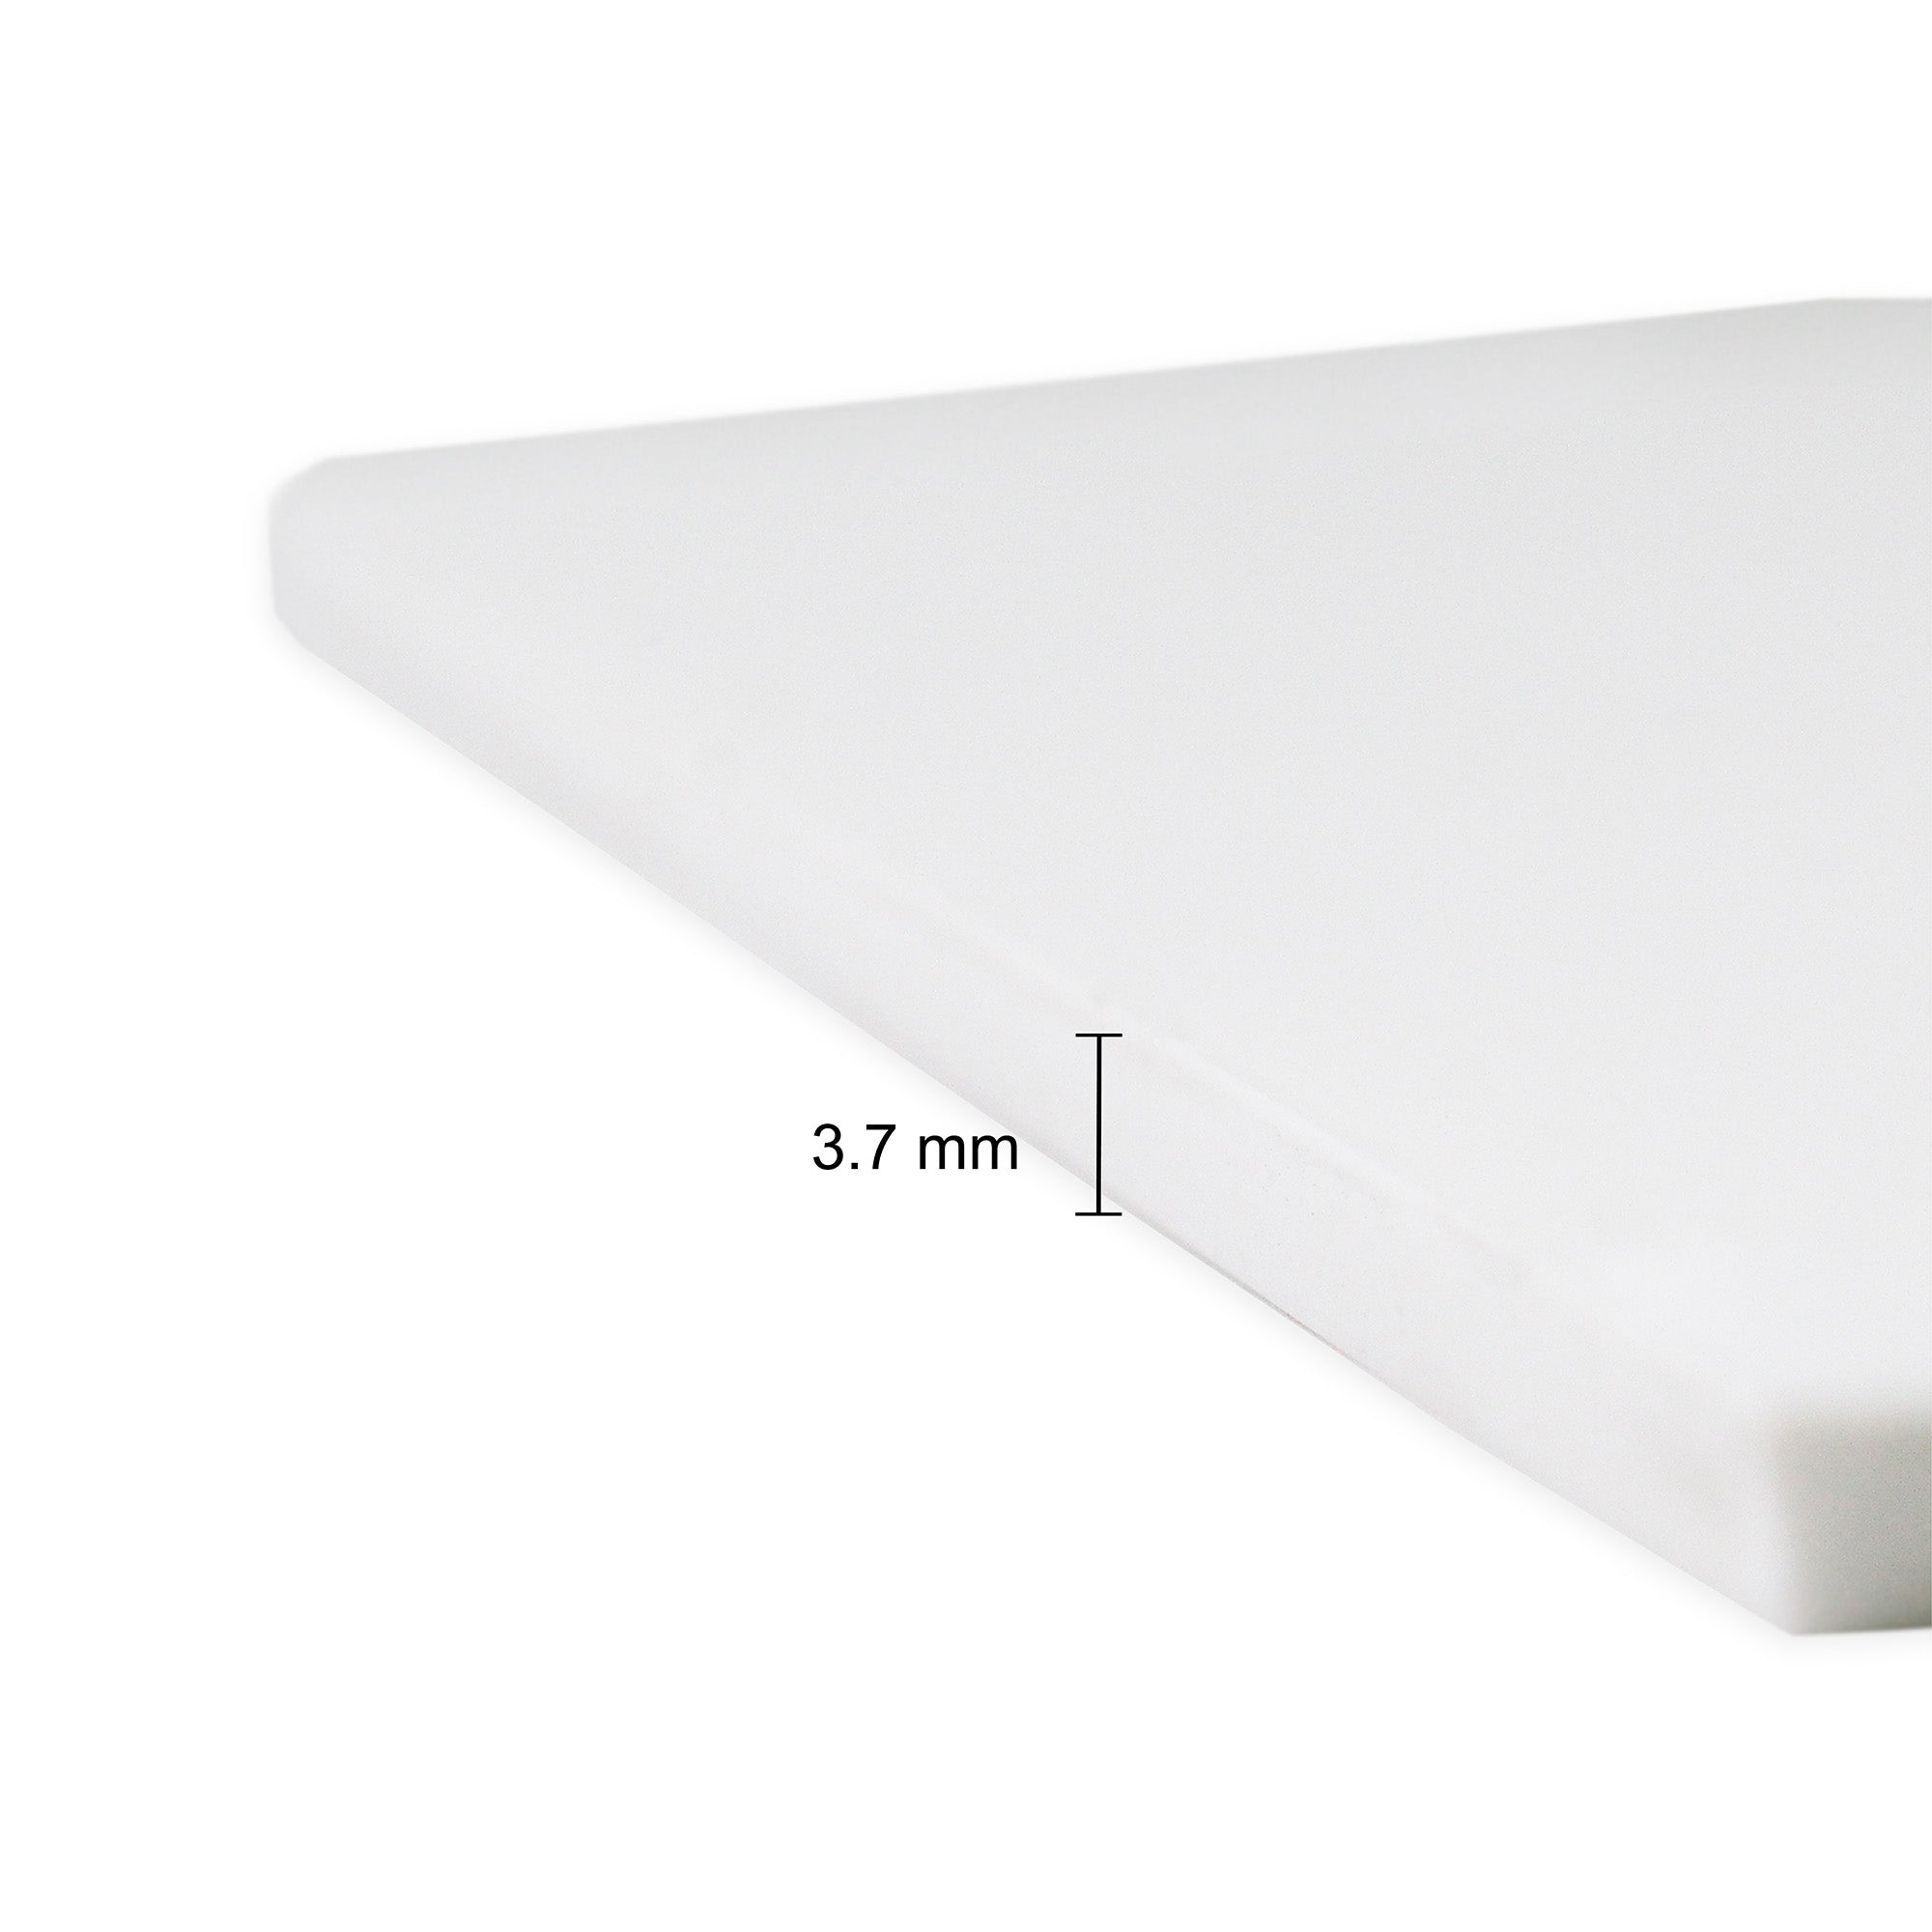 Acrylic Base White 3.7Mm Thickness 4Inch X 4Inch 1Pc Shrink Lb